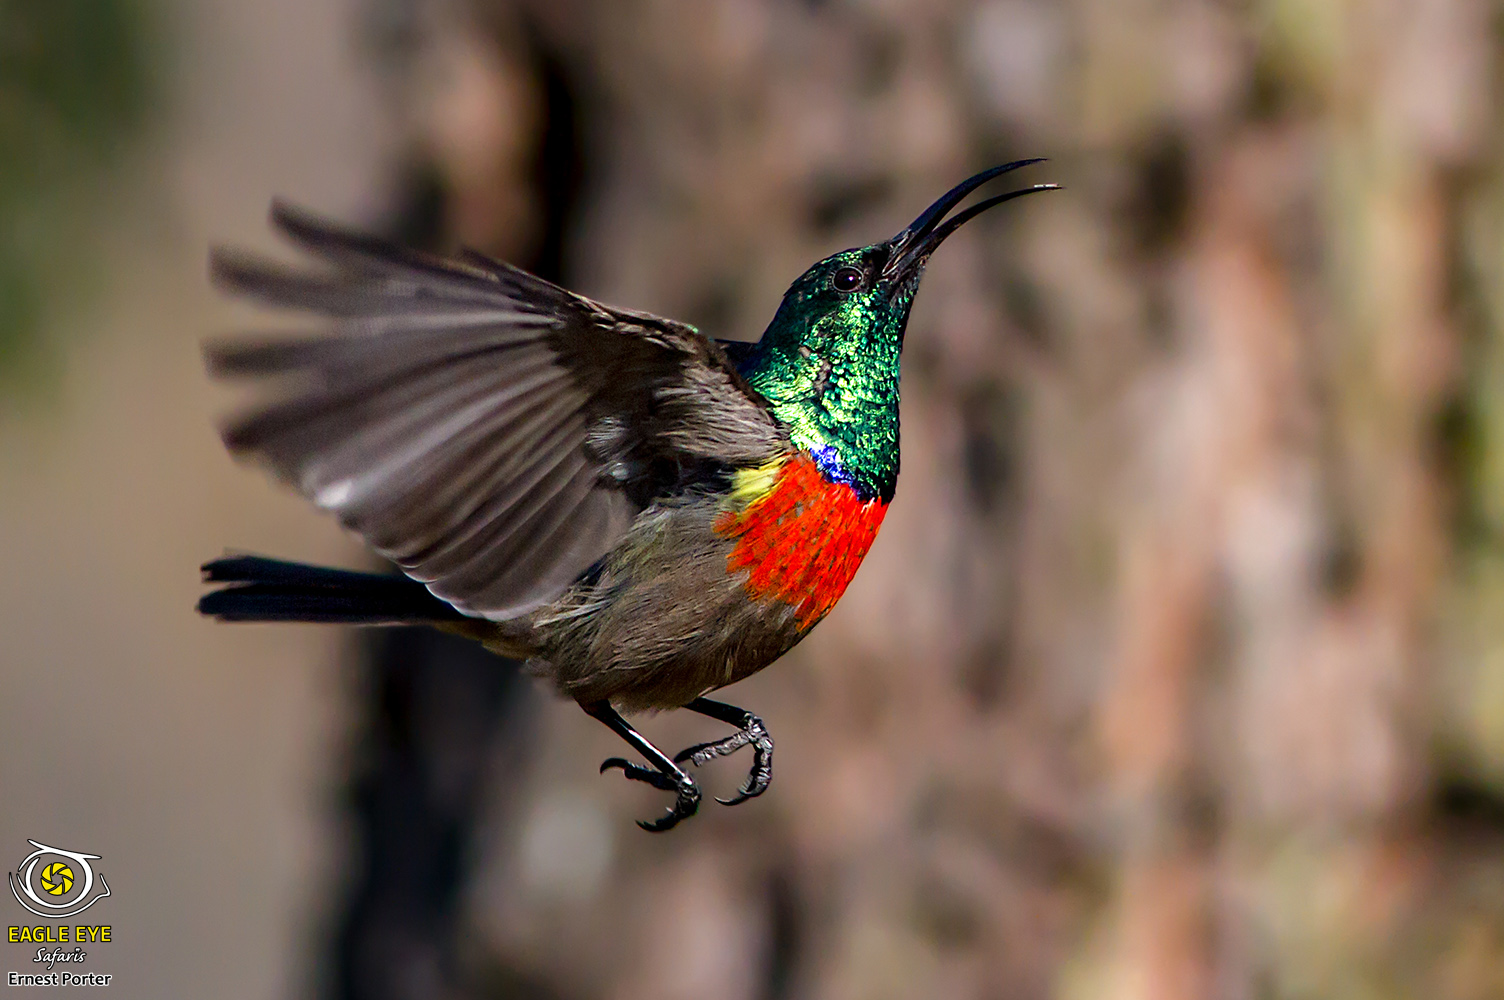 Tiny and Busy (Greater Double-collared Sunbird)